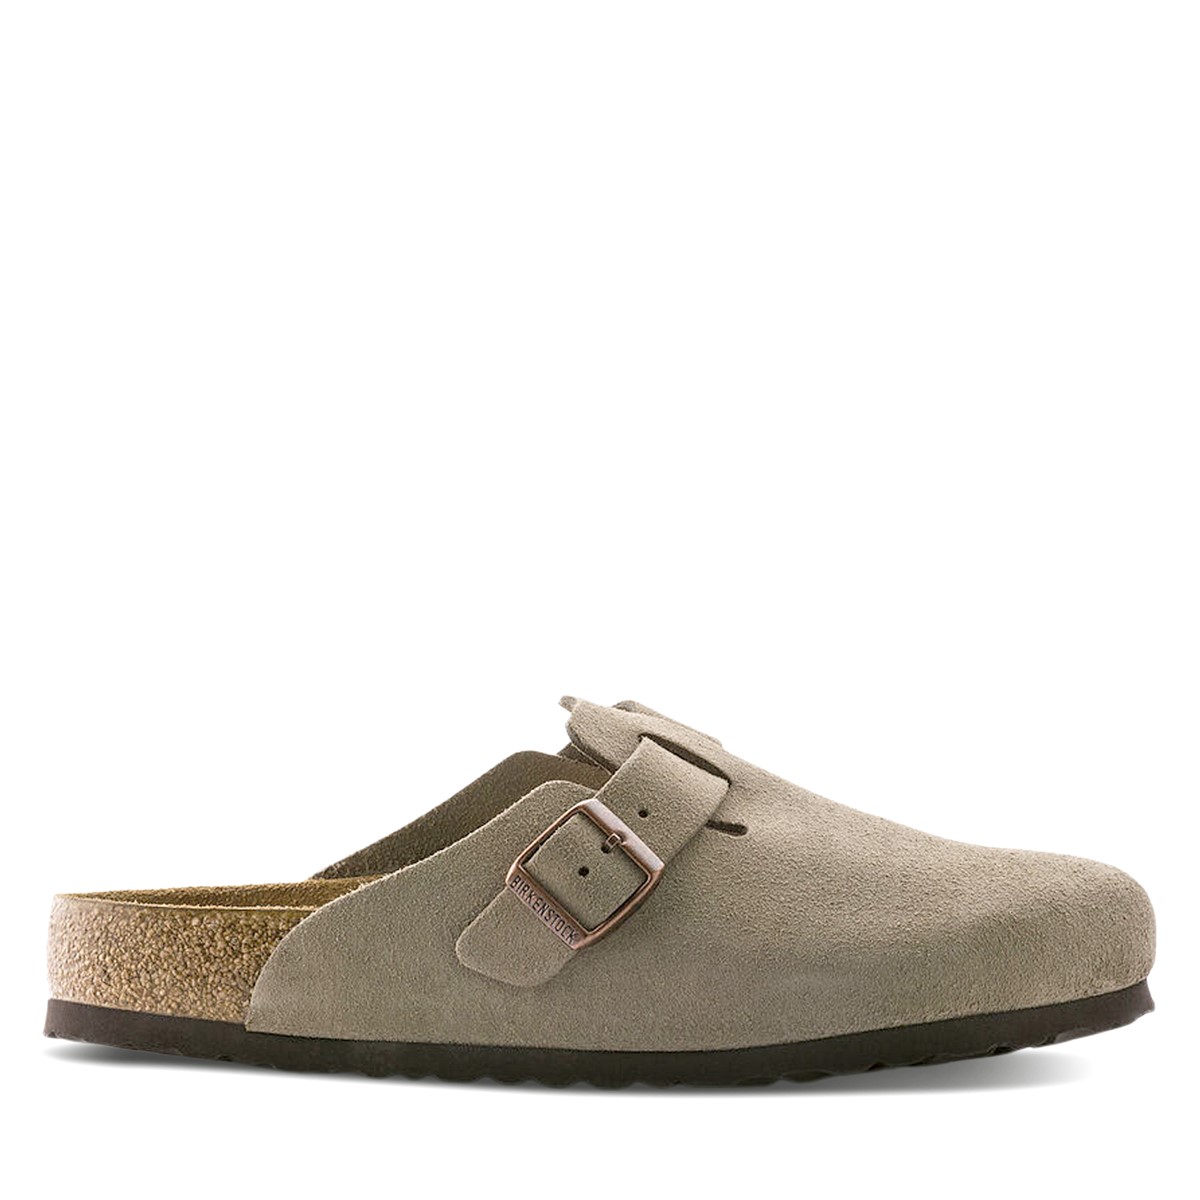 Women's Boston Clogs in Taupe